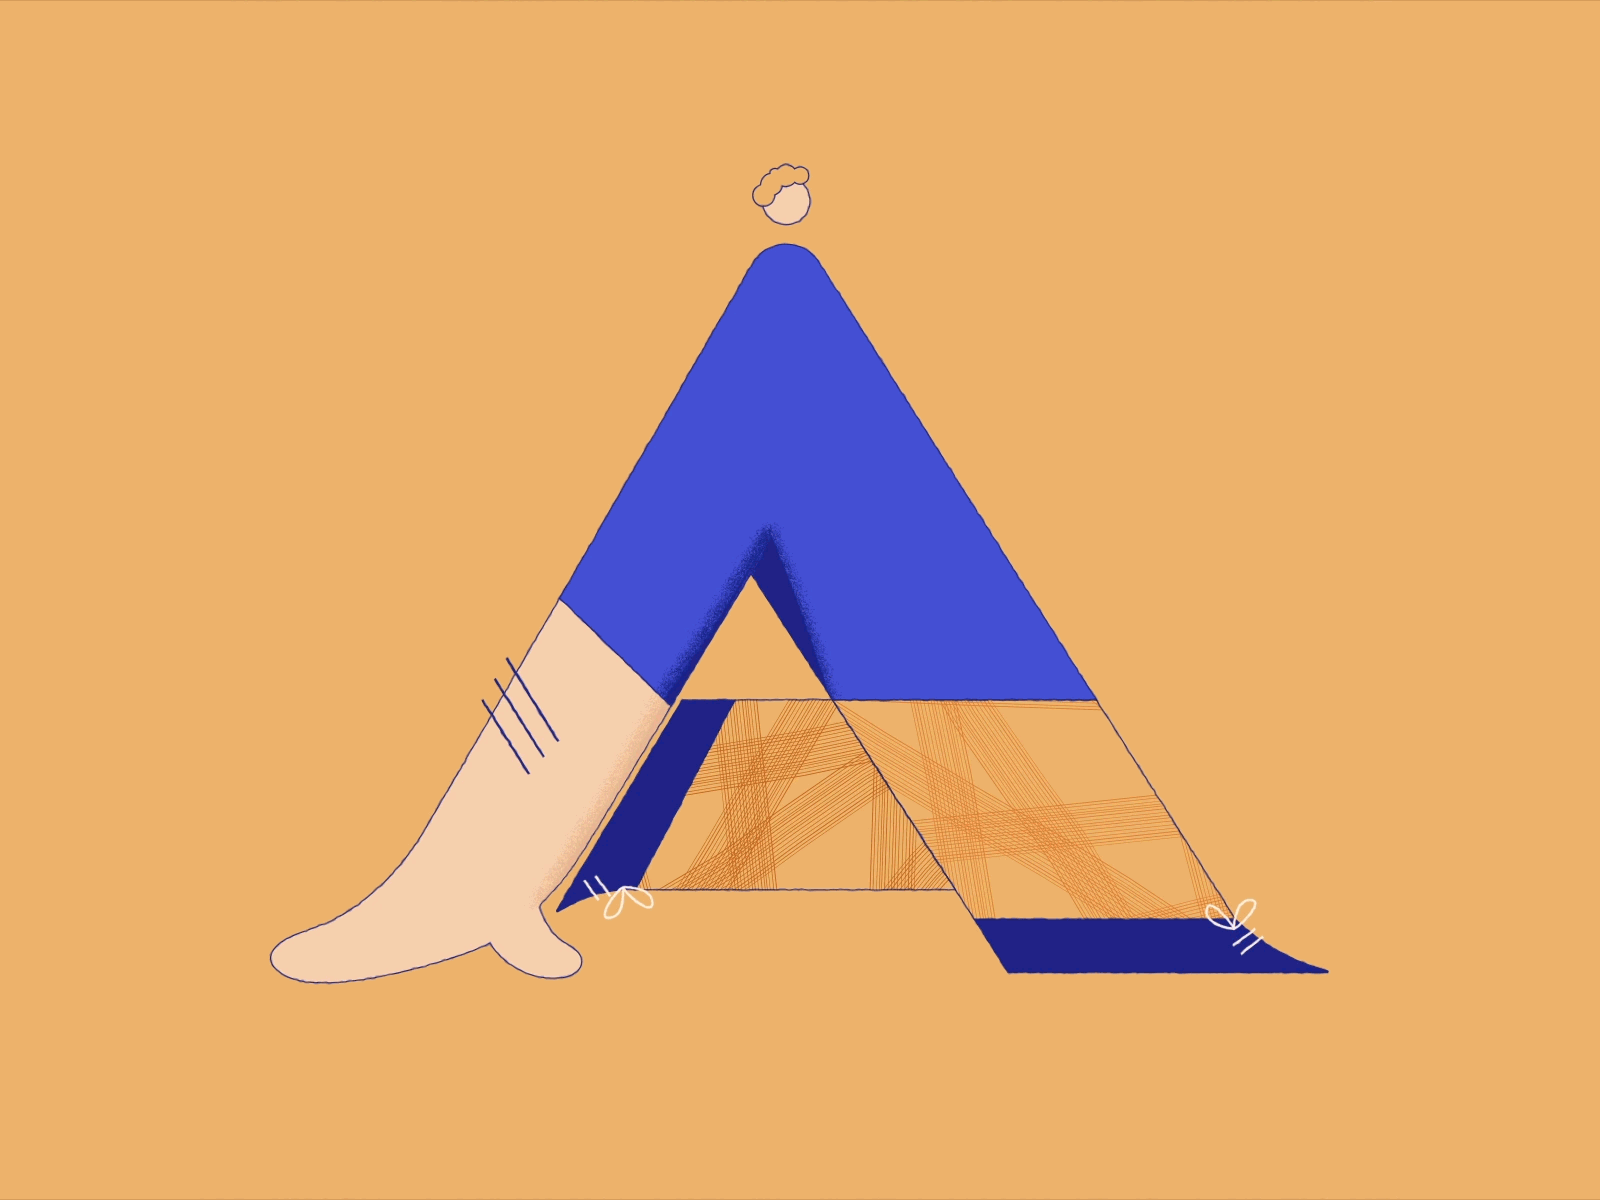 A 36daysoftype 36daysoftype07 animation character color creative design illustration loop texture